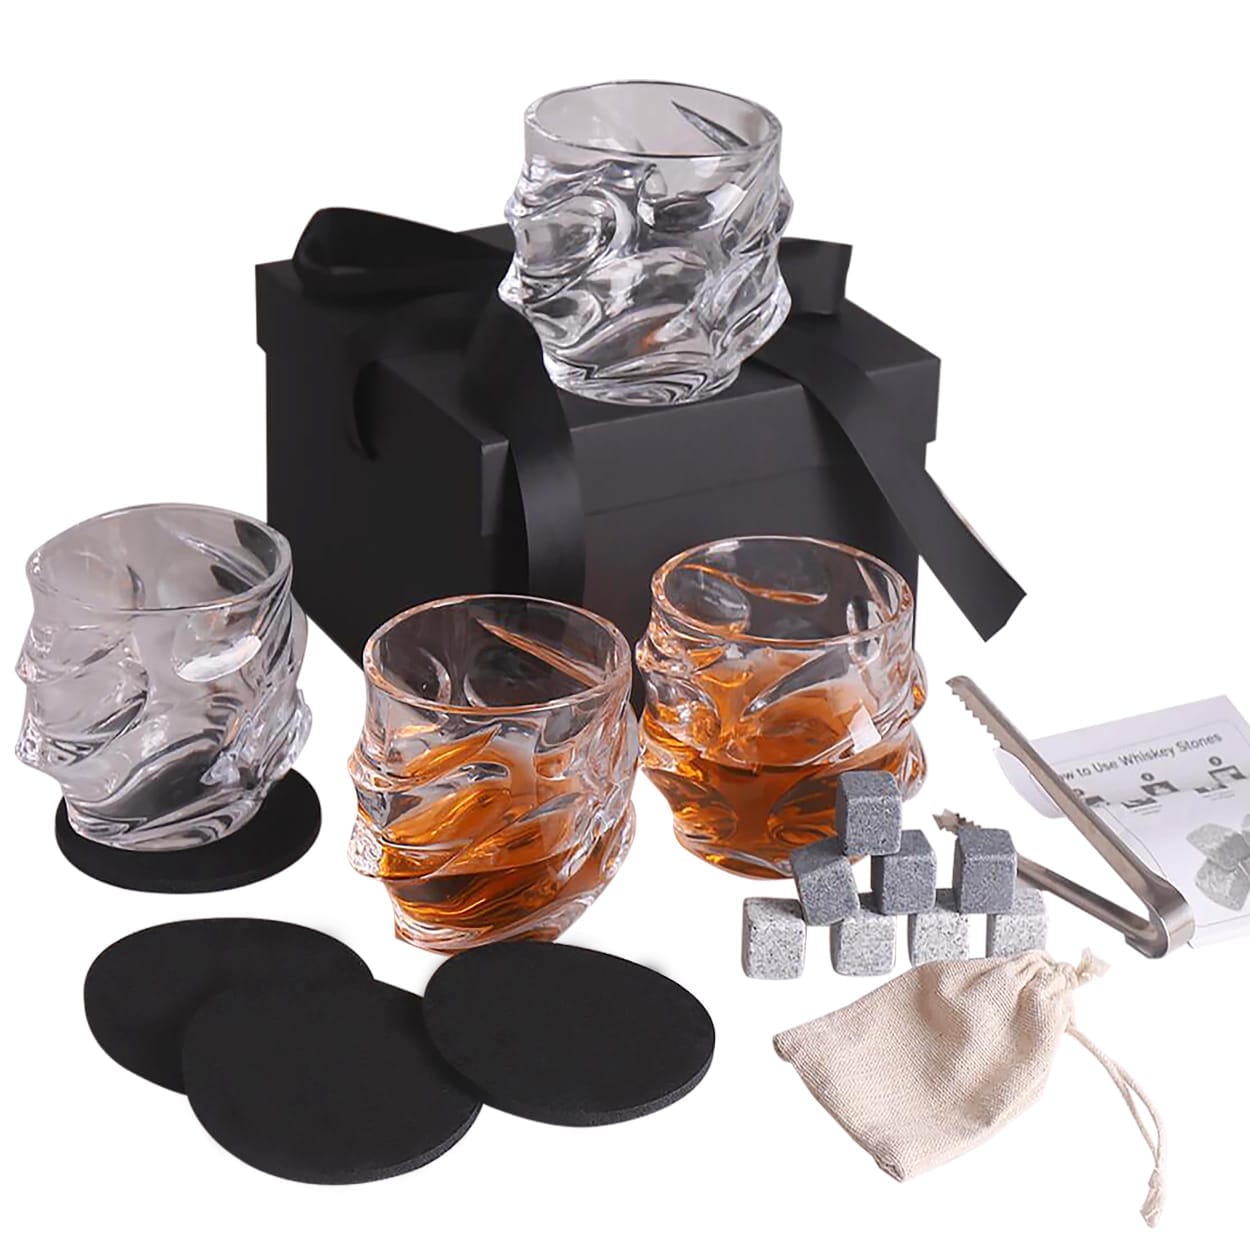 Whisky Gift Set With Ice Stones, Tong & Coaster